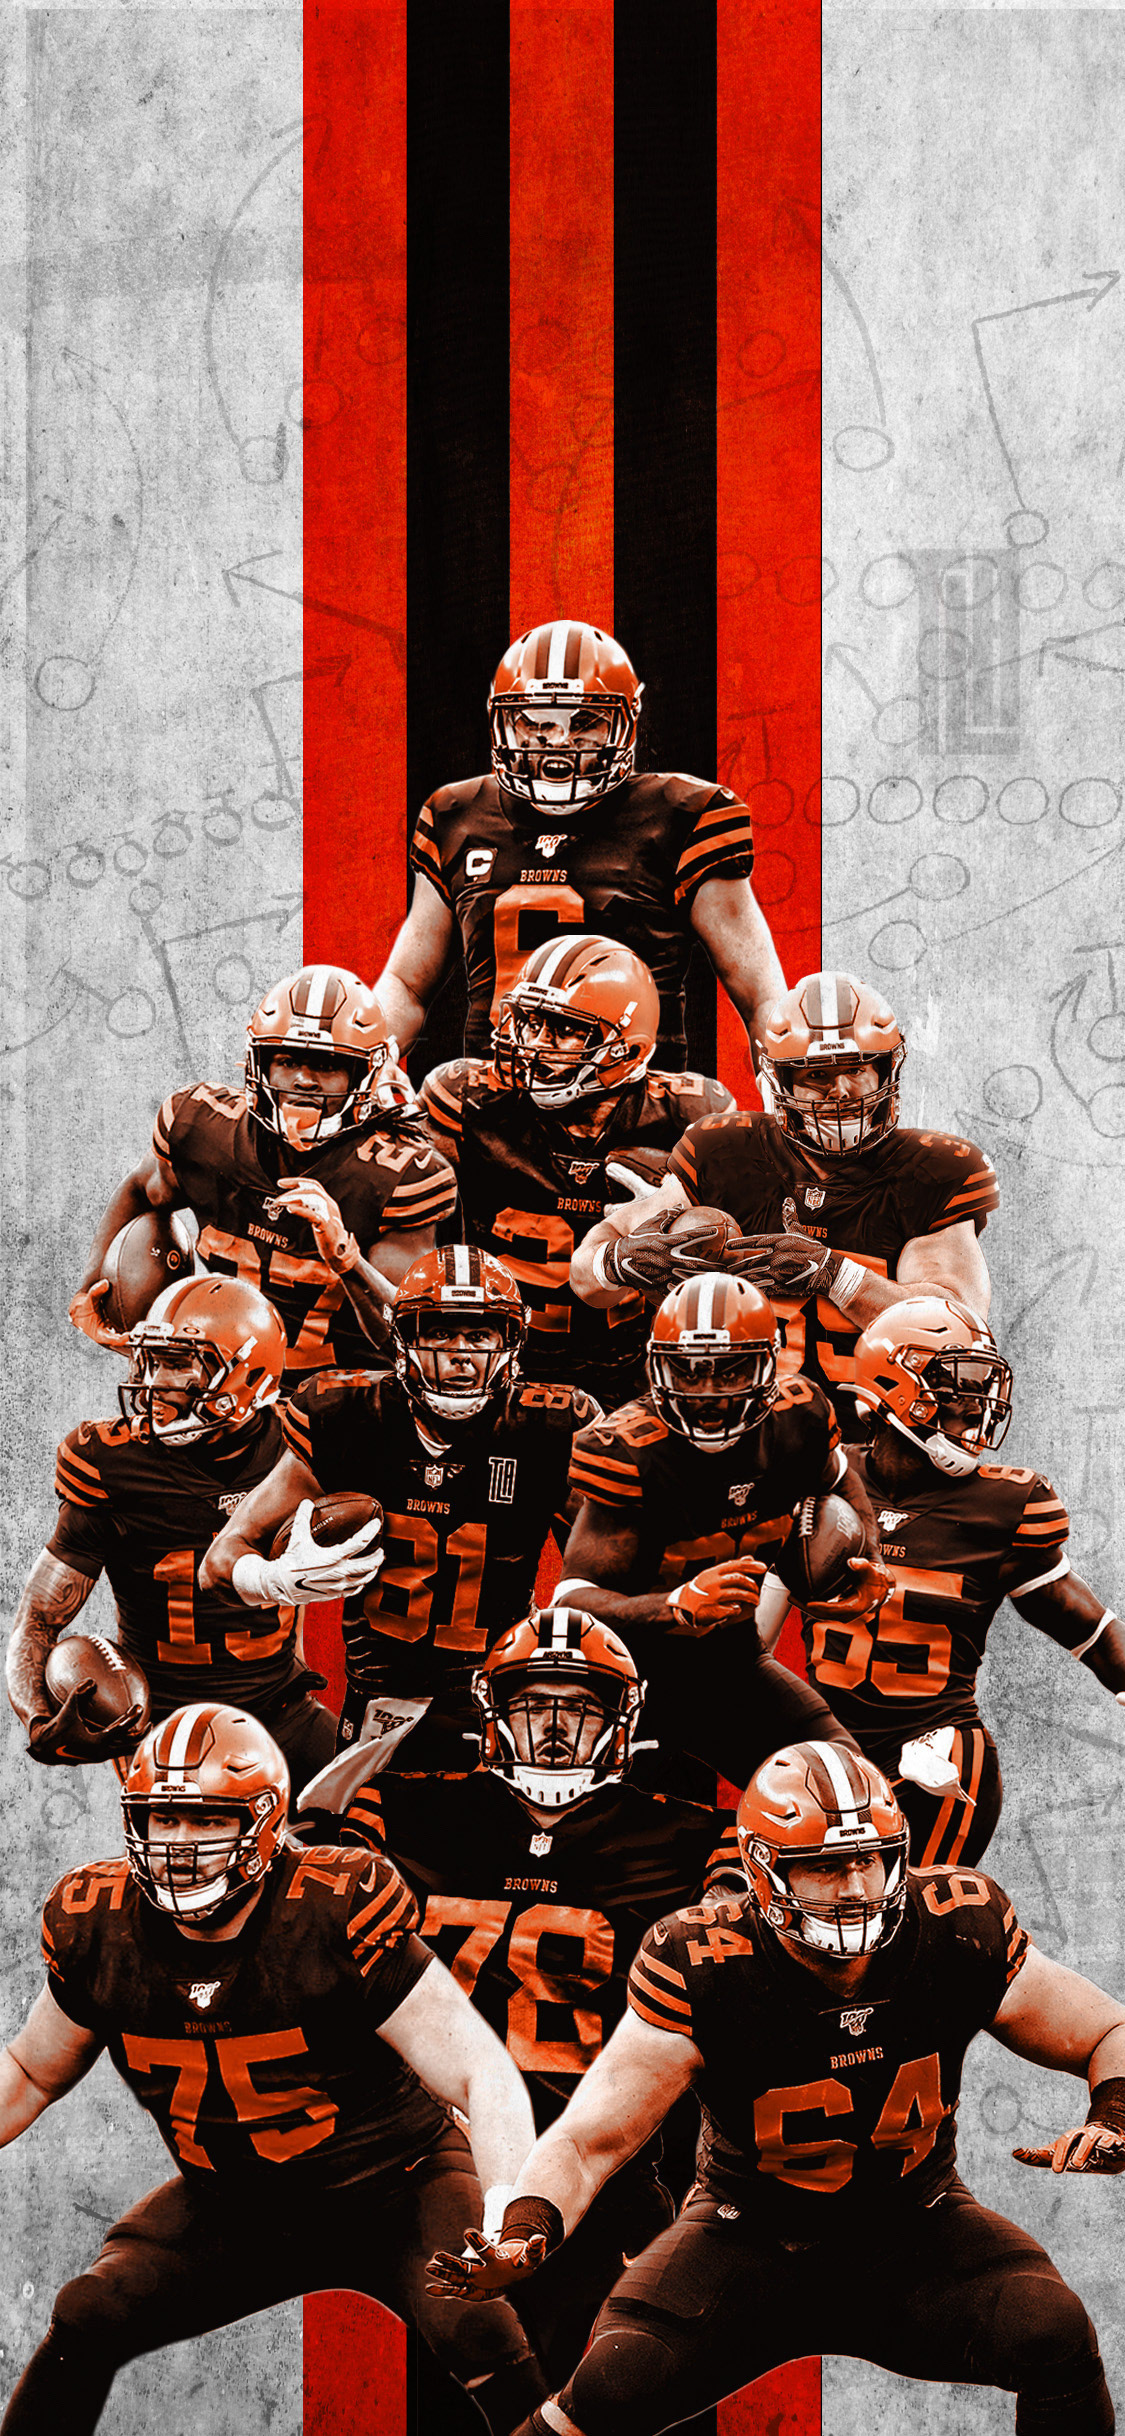 2020 Cleveland browns IPhone Wallpaper on Behance